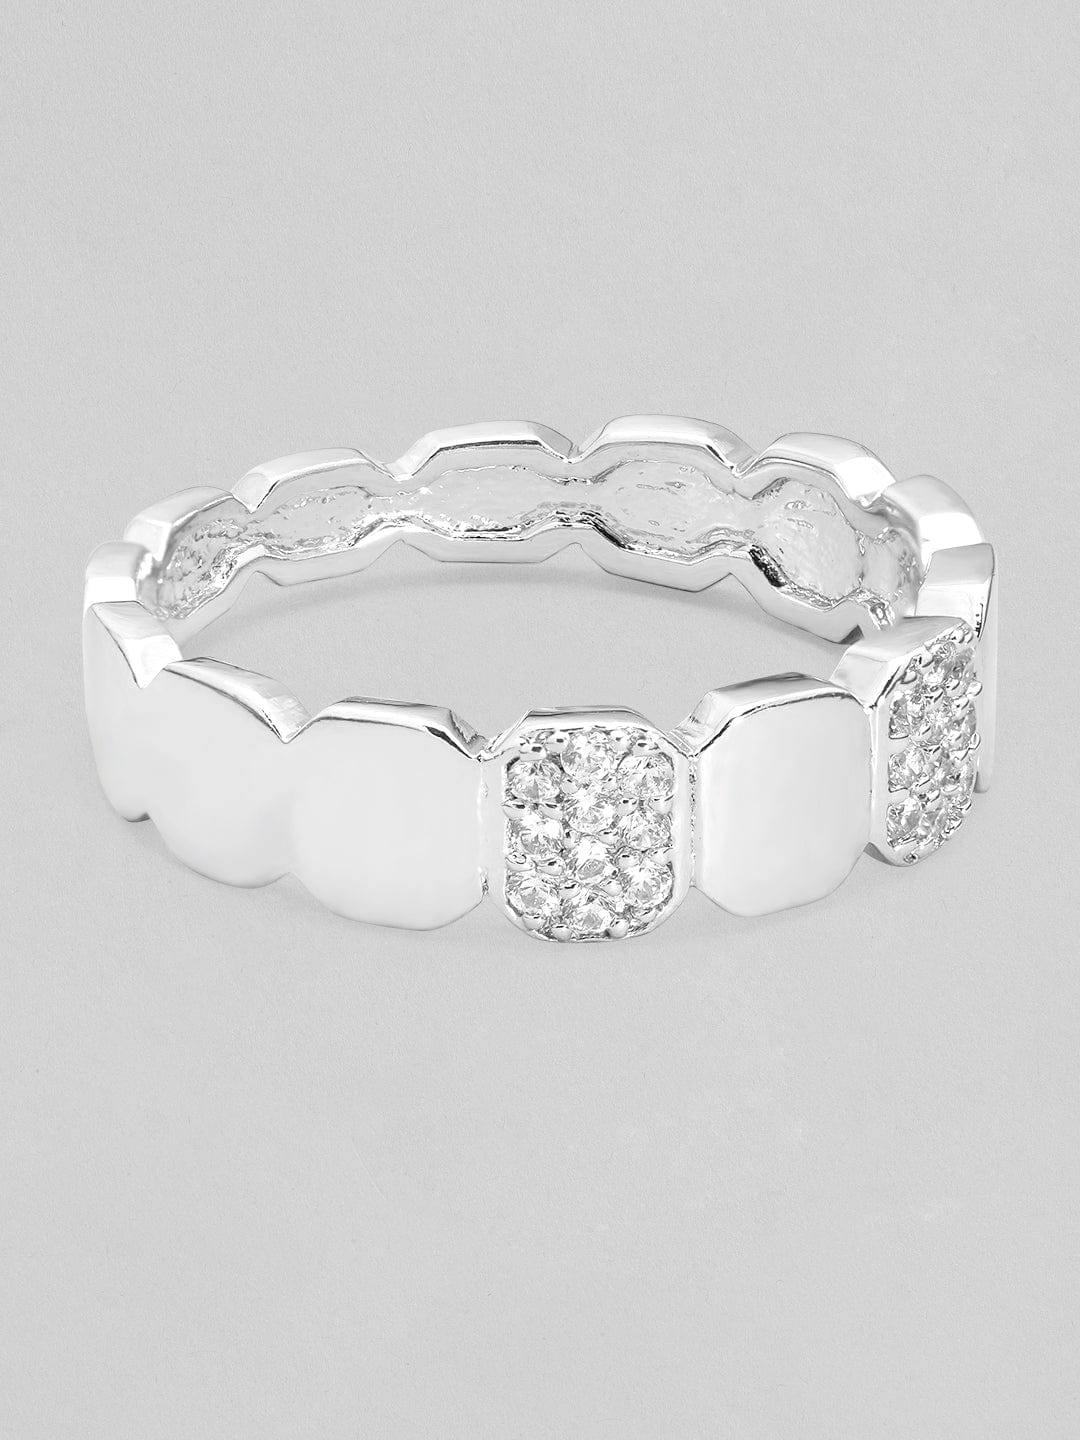 Rubans 925 Silver The Fusion Of Pastel And Pave Ring. Rings